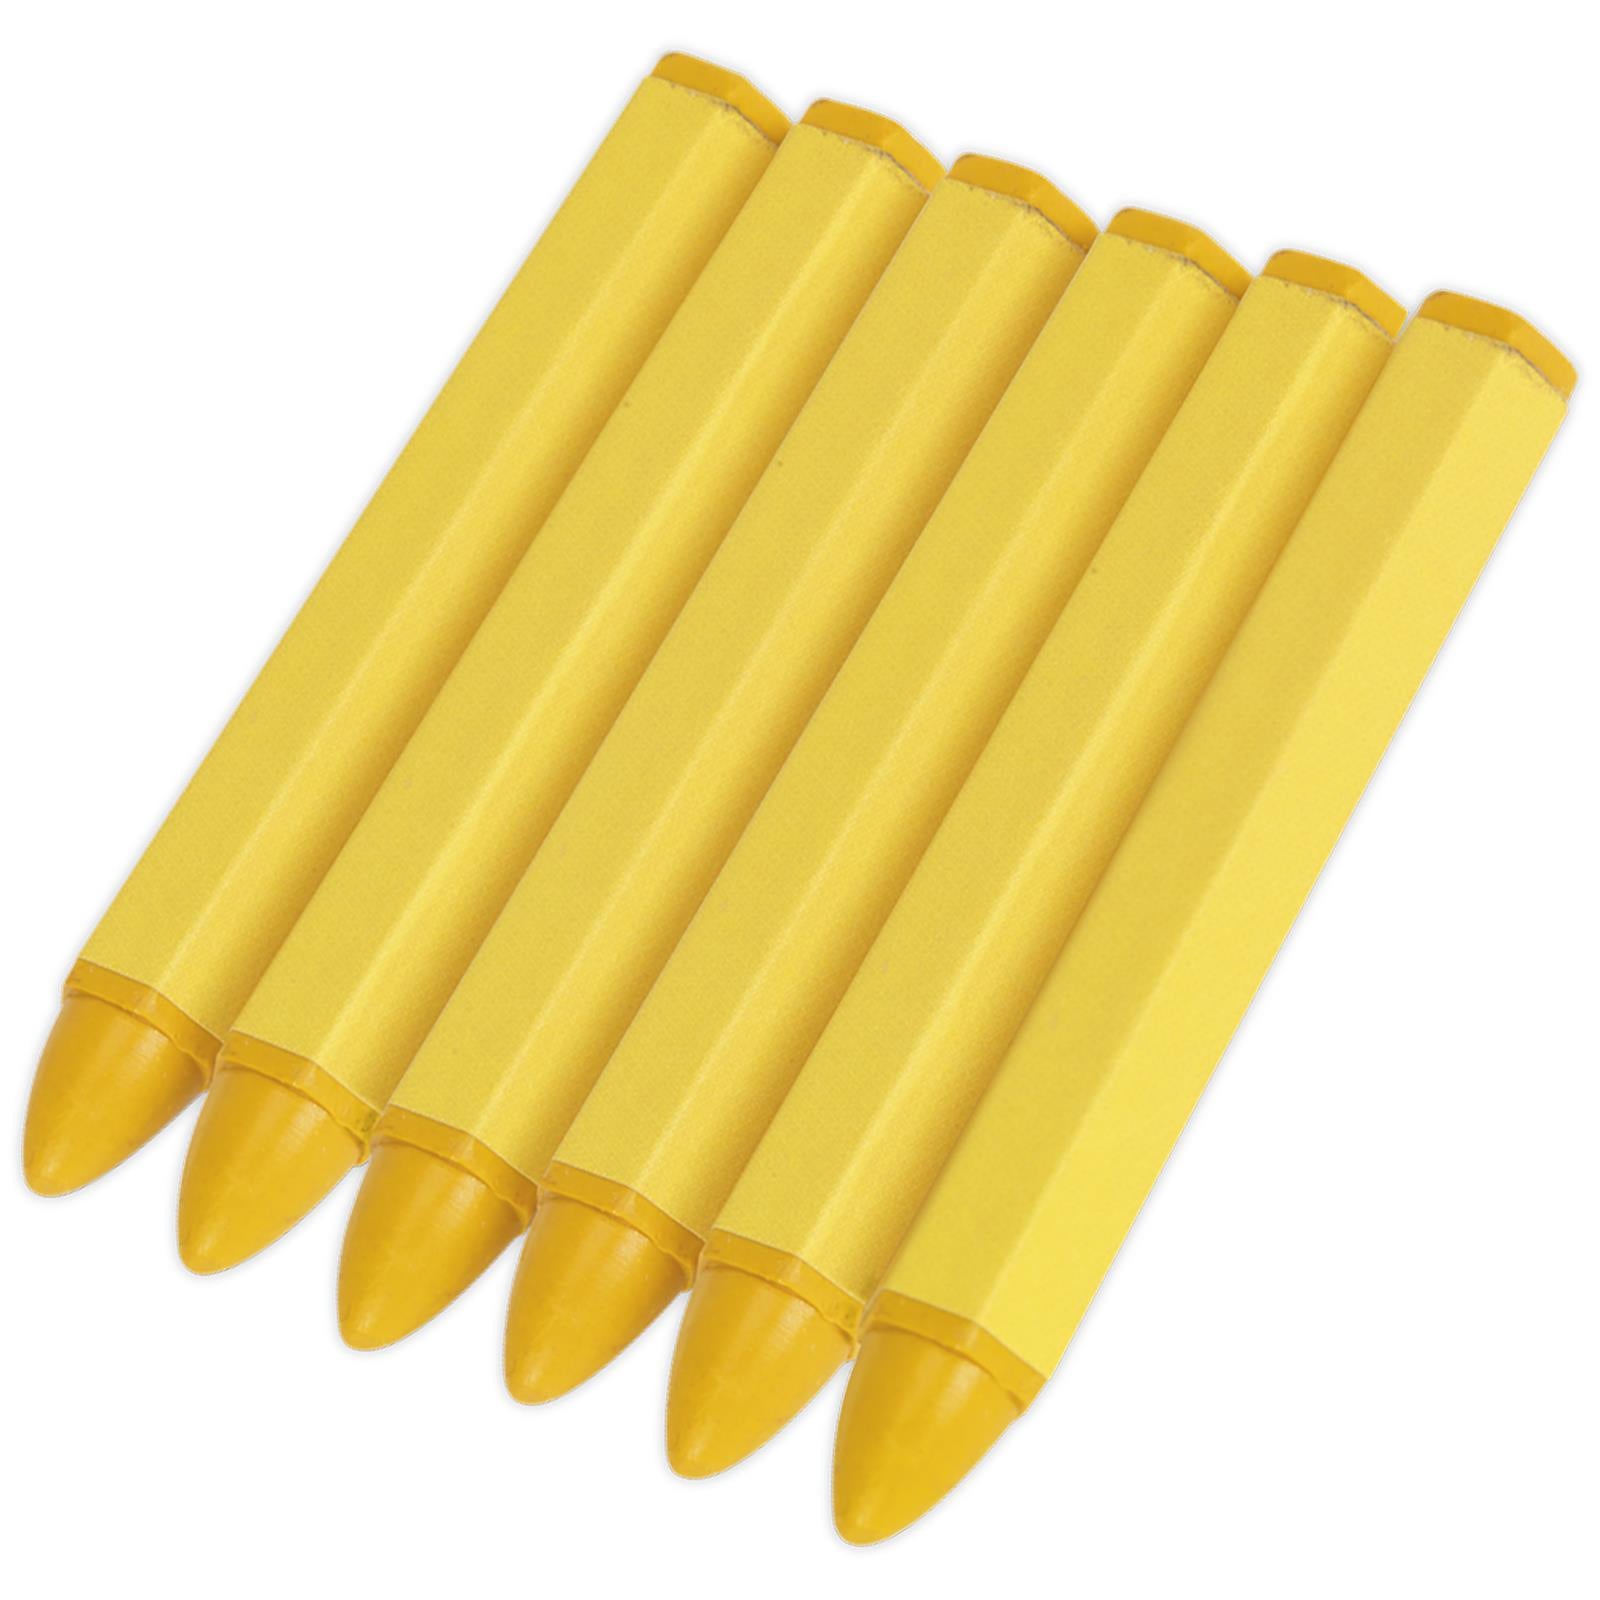 Sealey Tyre Marking Crayon - Yellow Pack of 6